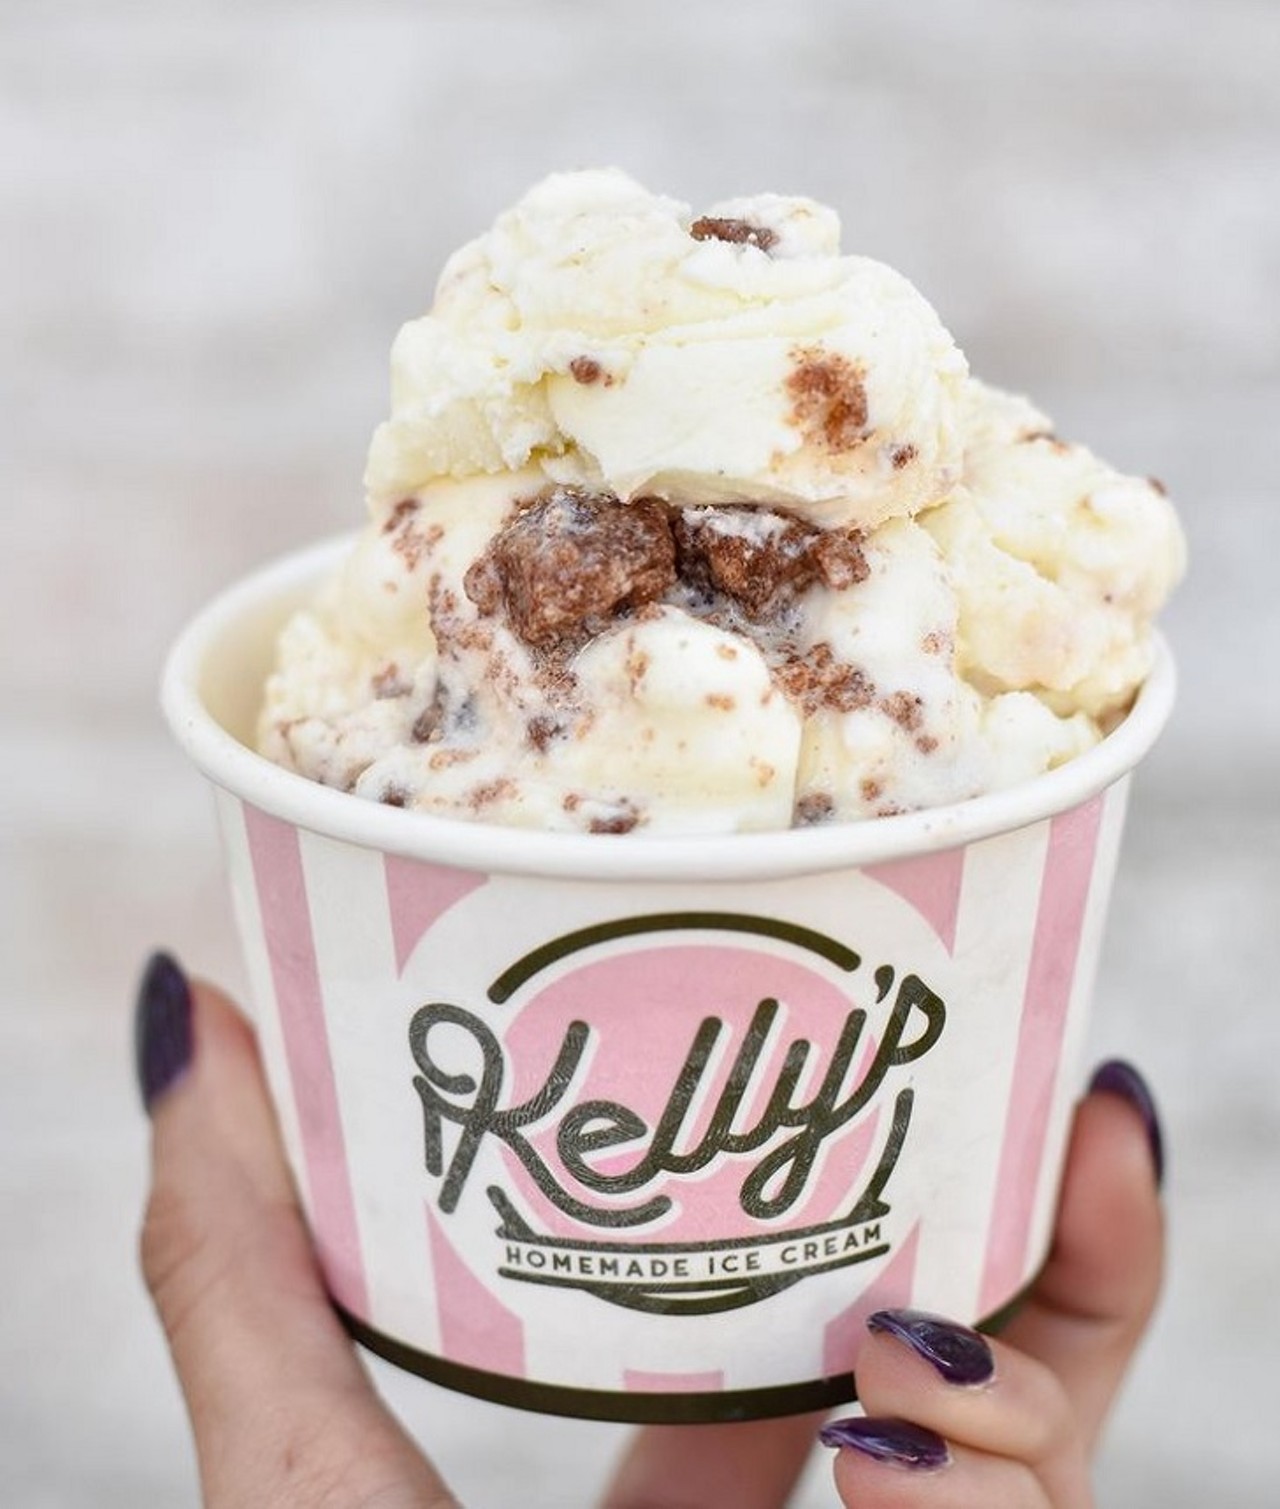 Kelly&#146;s Homemade Ice Cream 
3114 Corrine Drive
Homemade ice cream is arguably one of the best ice creams, and that&#146;s what you get at Kelly&#146;s. A delightful array of sweet treats from an Orlando-native business -- who could ask for more?
Photo via Kelly&#146;s Homemade Ice Cream/Instagram